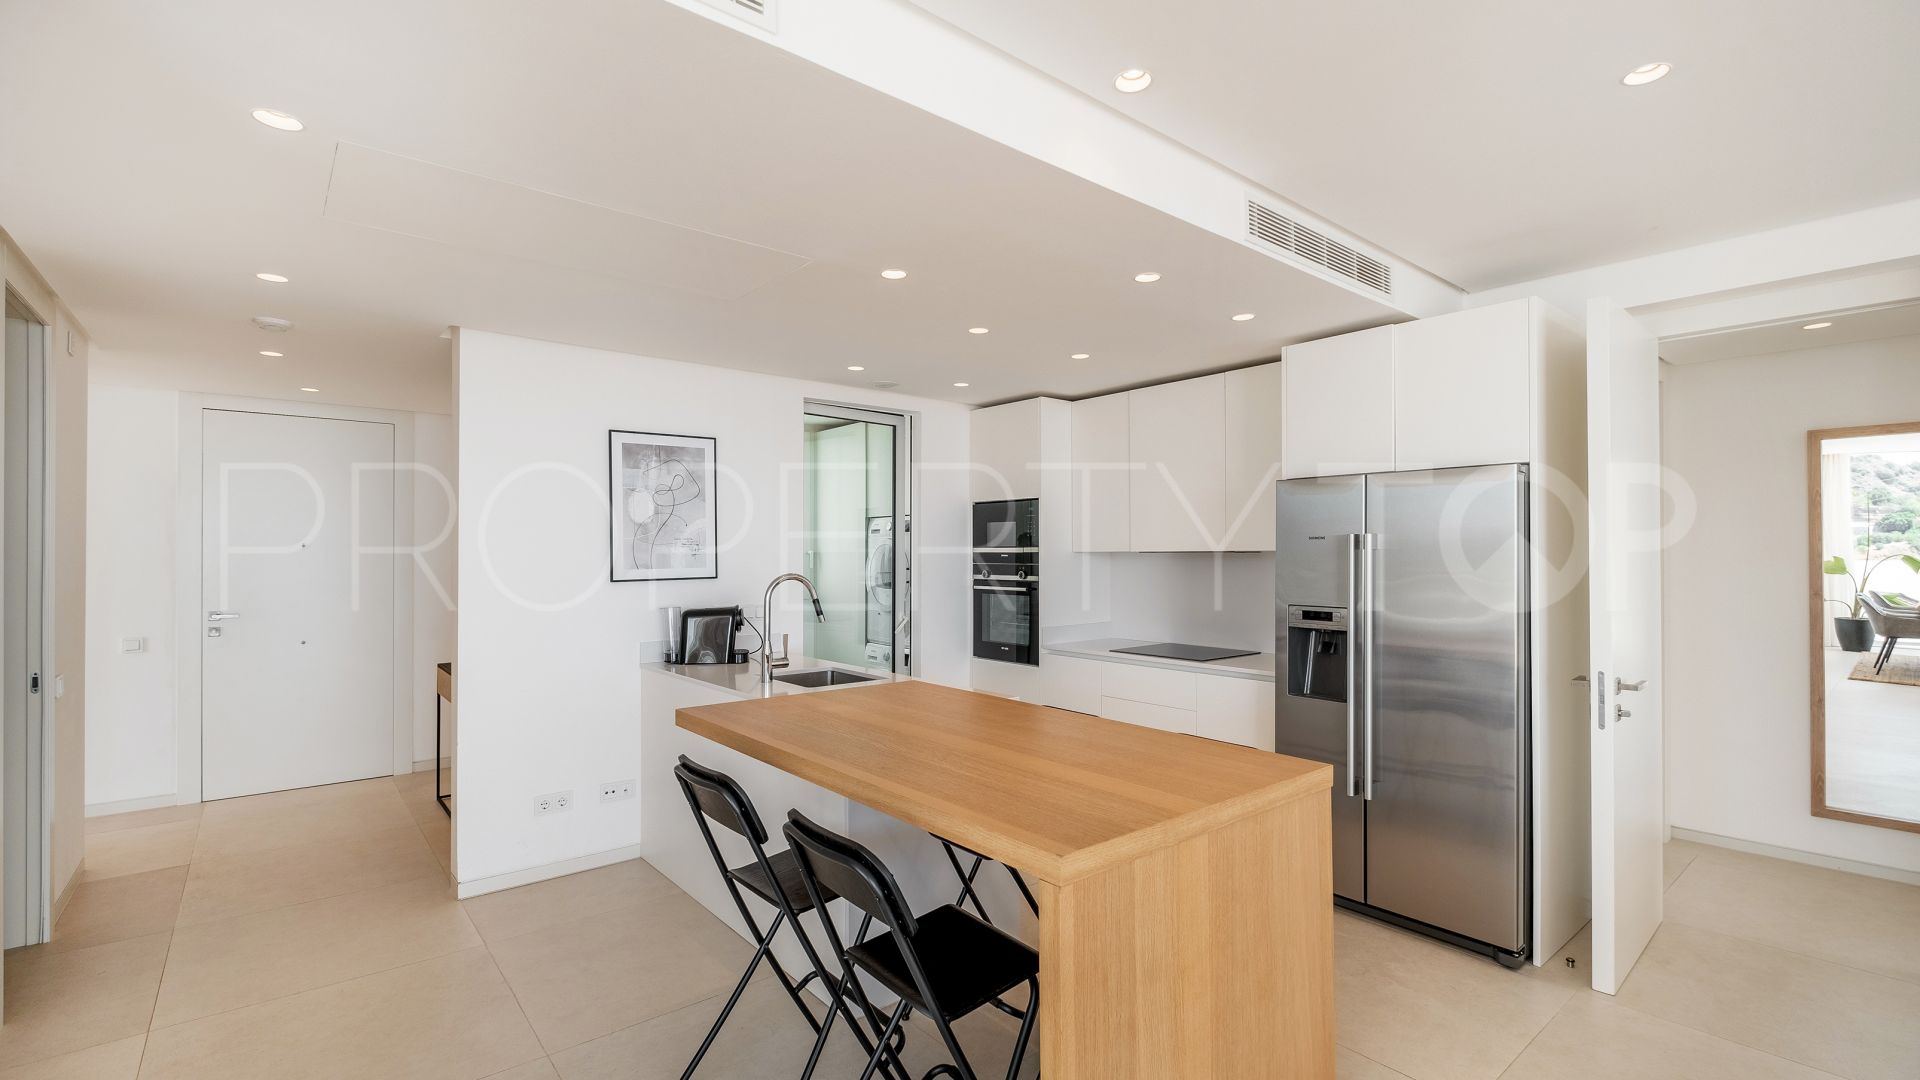 For sale duplex penthouse in Palo Alto with 3 bedrooms